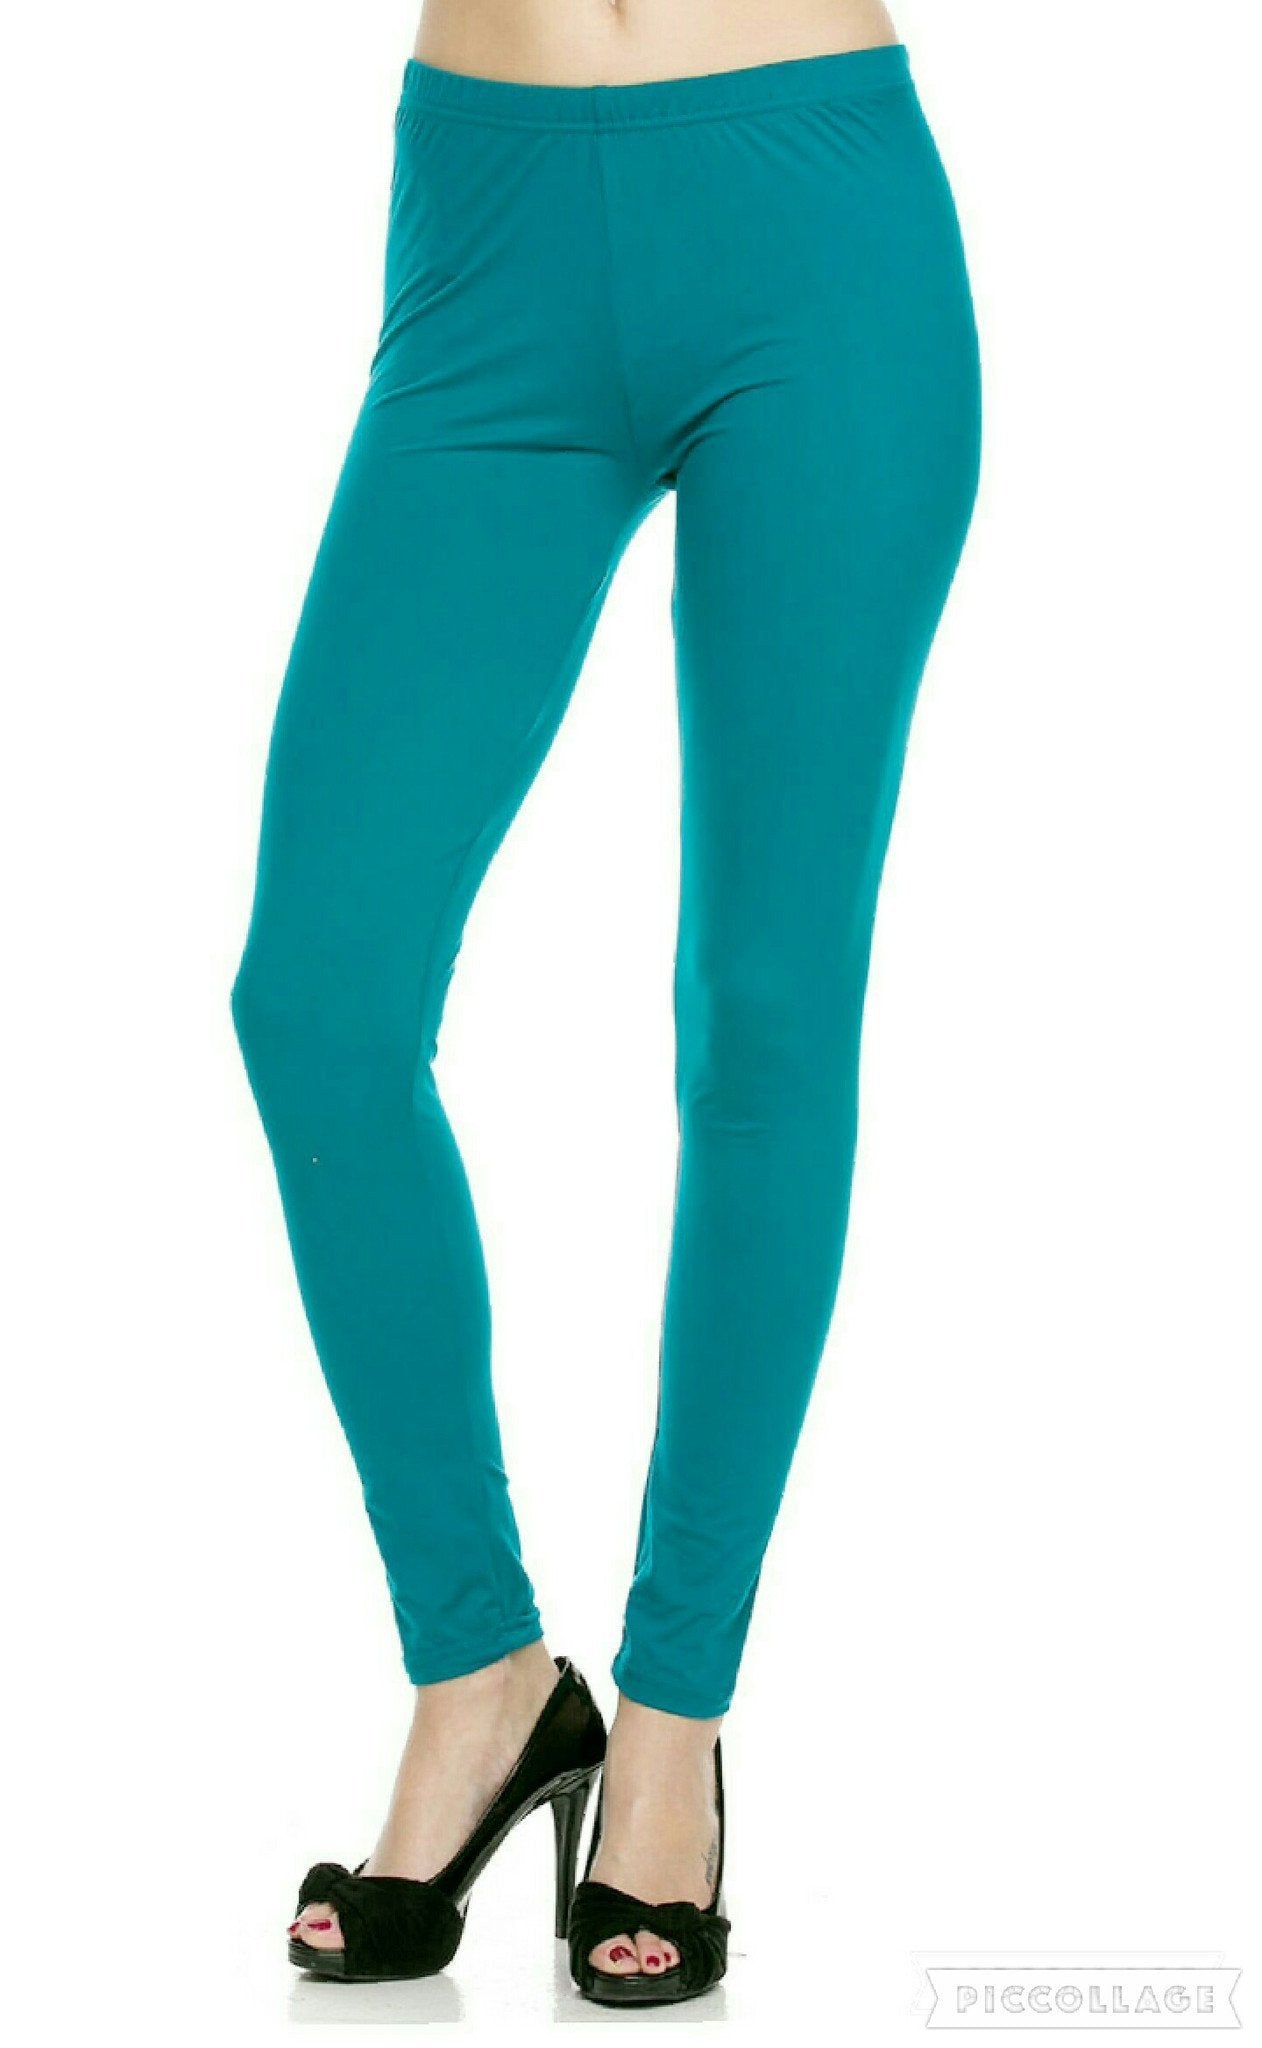 Turquoise Blue Women's Leggings, Bright Solid Color Dressy Long